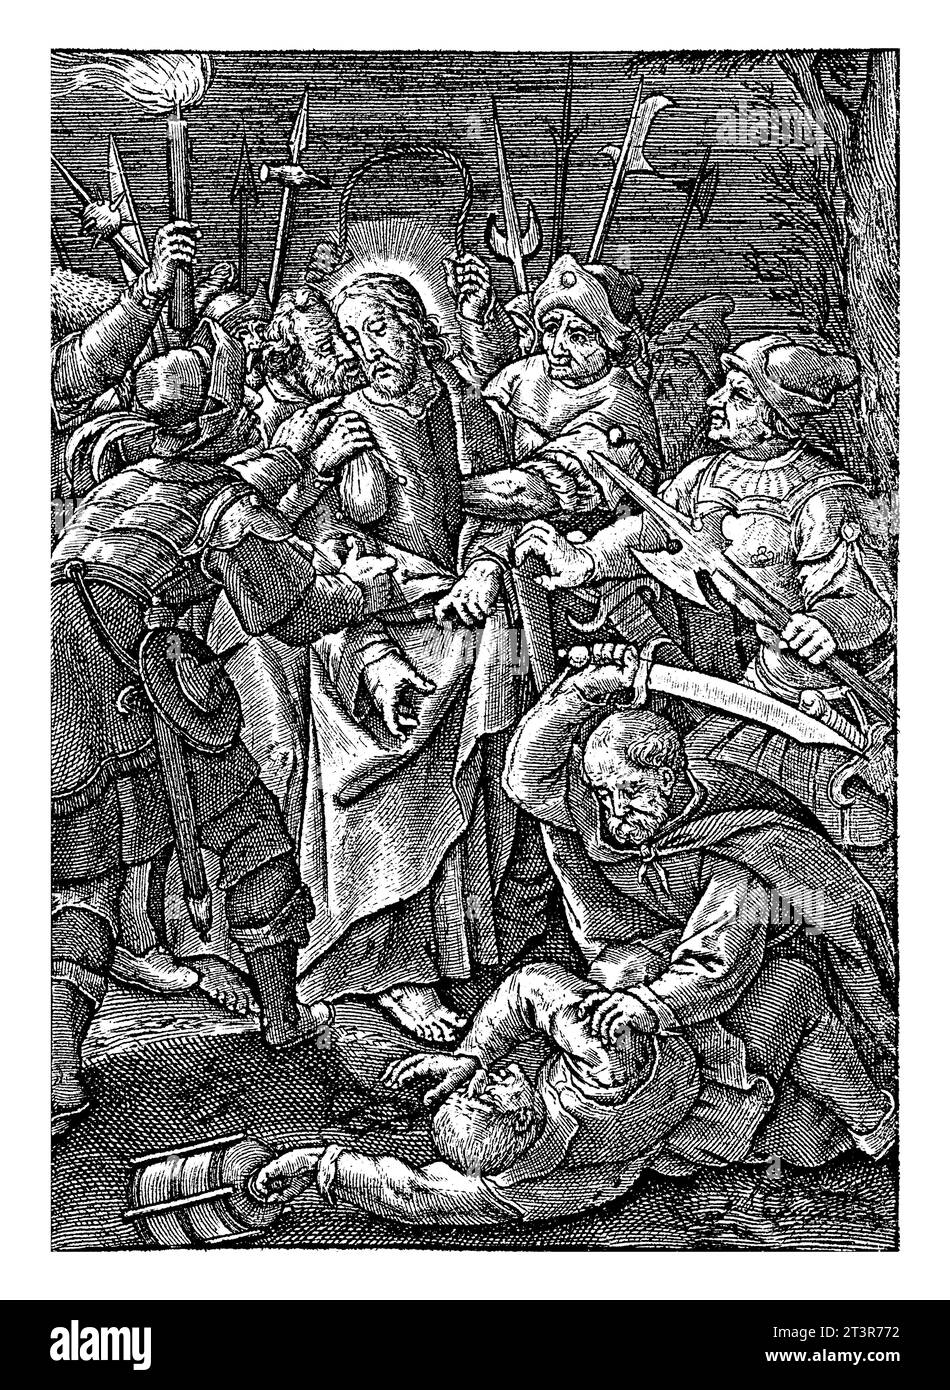 Judas Kiss and Arrest of Christ, Hieronymus Wierix, 1563 - before 1619 Judas kisses Christ on the cheek. The soldiers surround and arrest him. Stock Photo